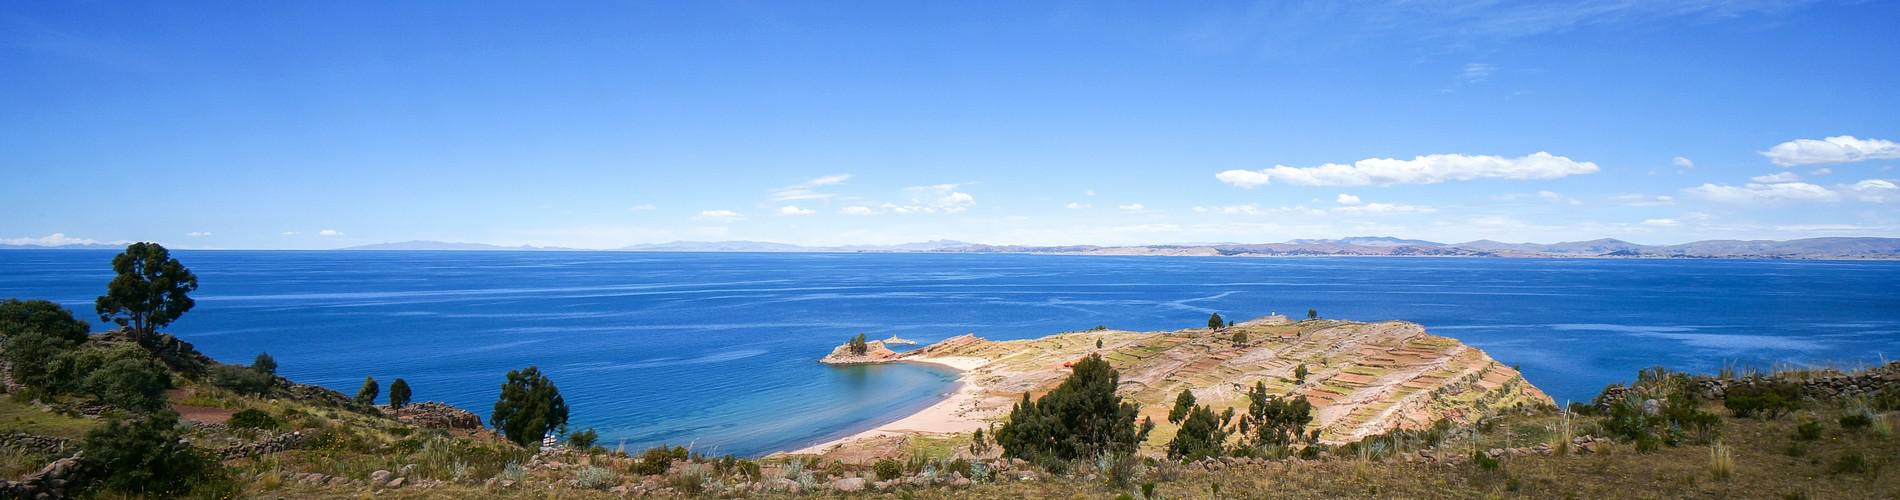 Top Activities to do on Lake Titicaca